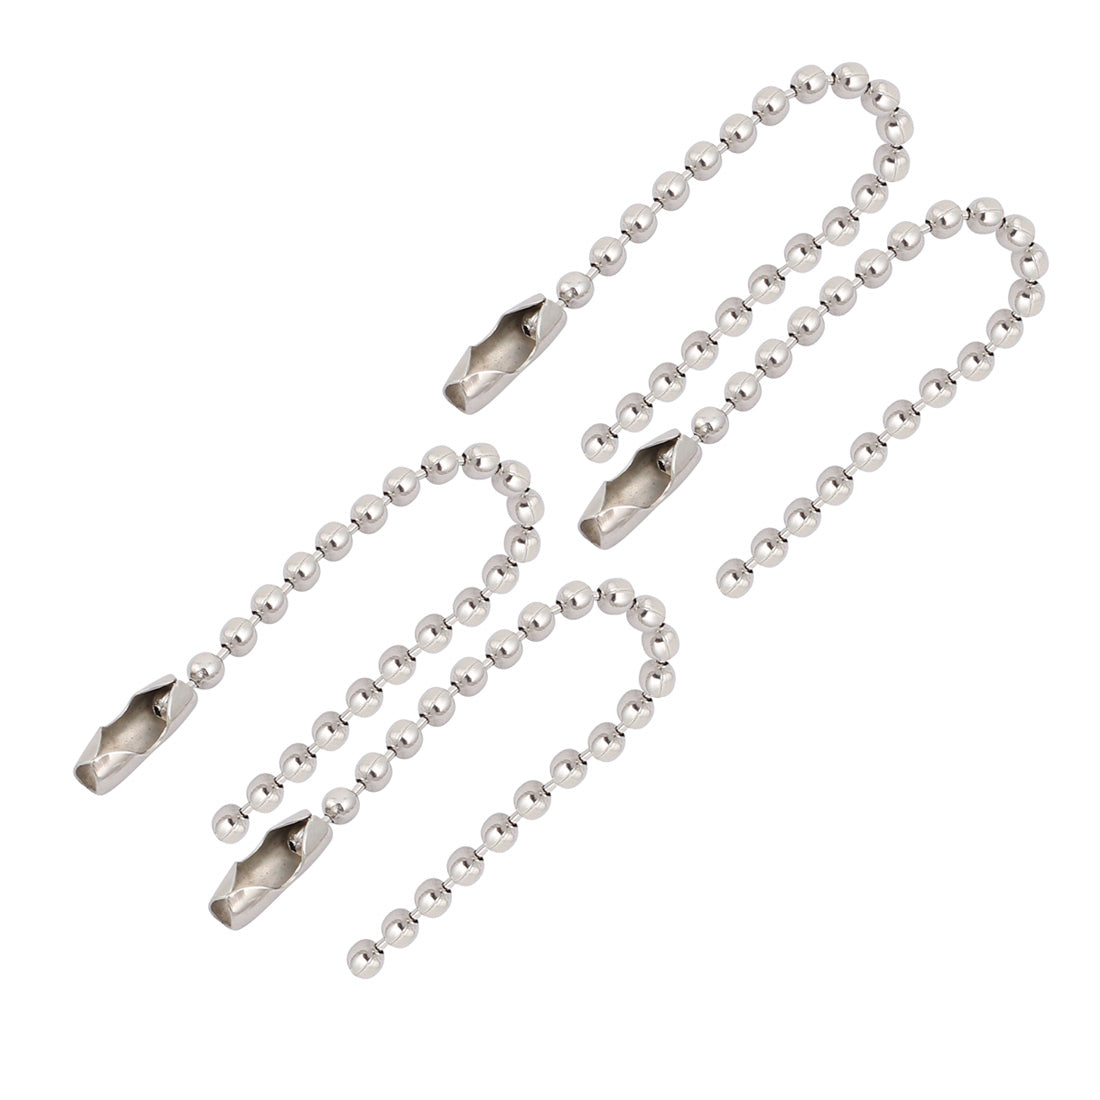 uxcell Uxcell Stainless Steel Bead Ball Chain Keychain 2.4mm by 3 Inches 4pcs